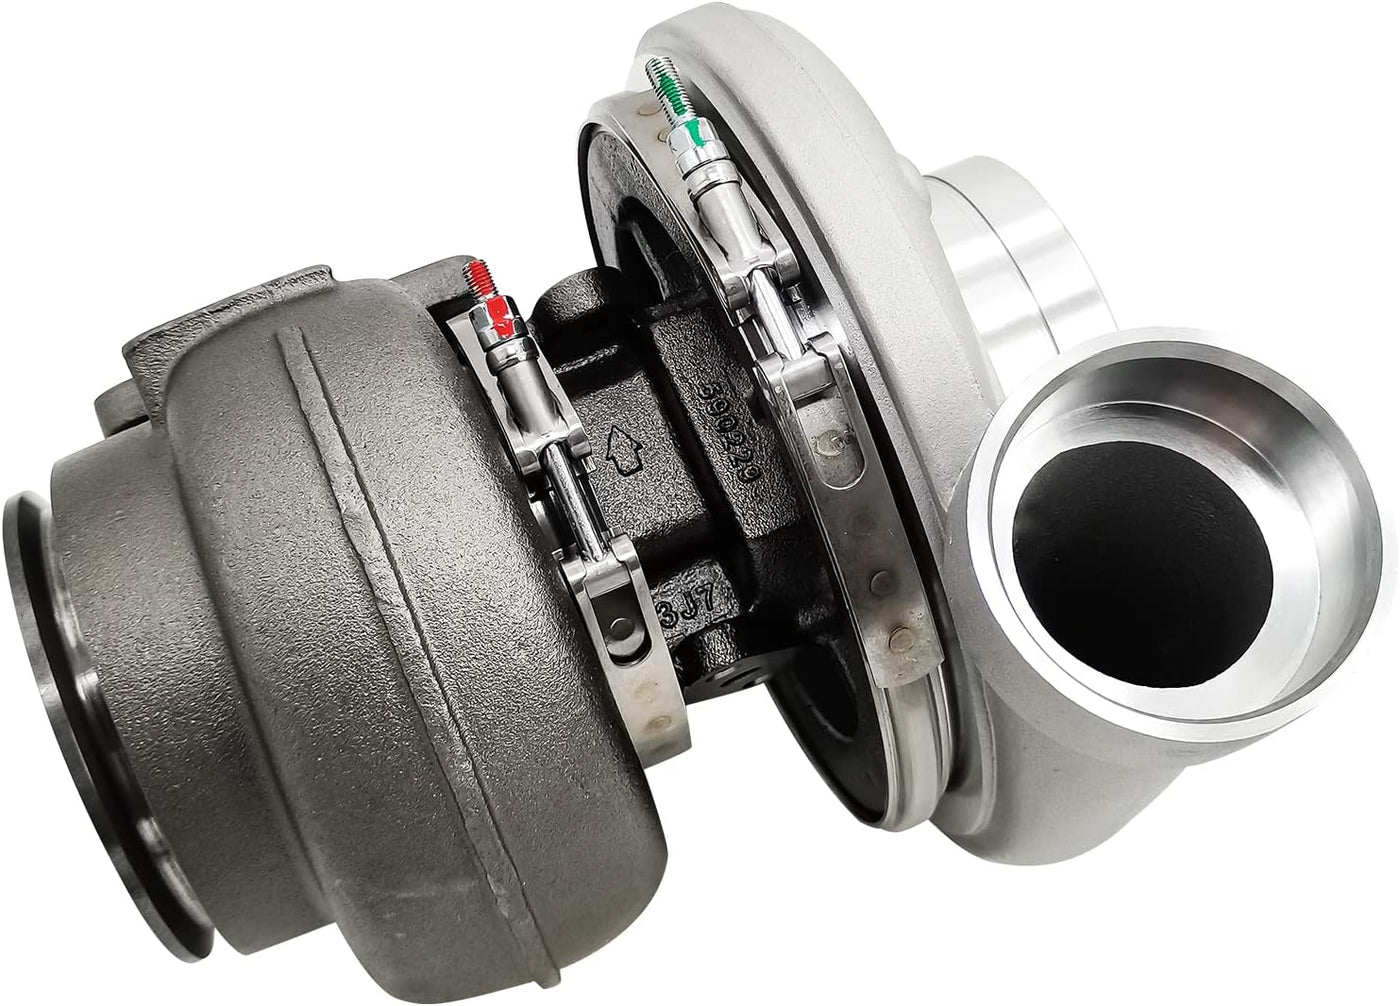 Turbo Turbocharger For Vo-lvo D12 engine - $420